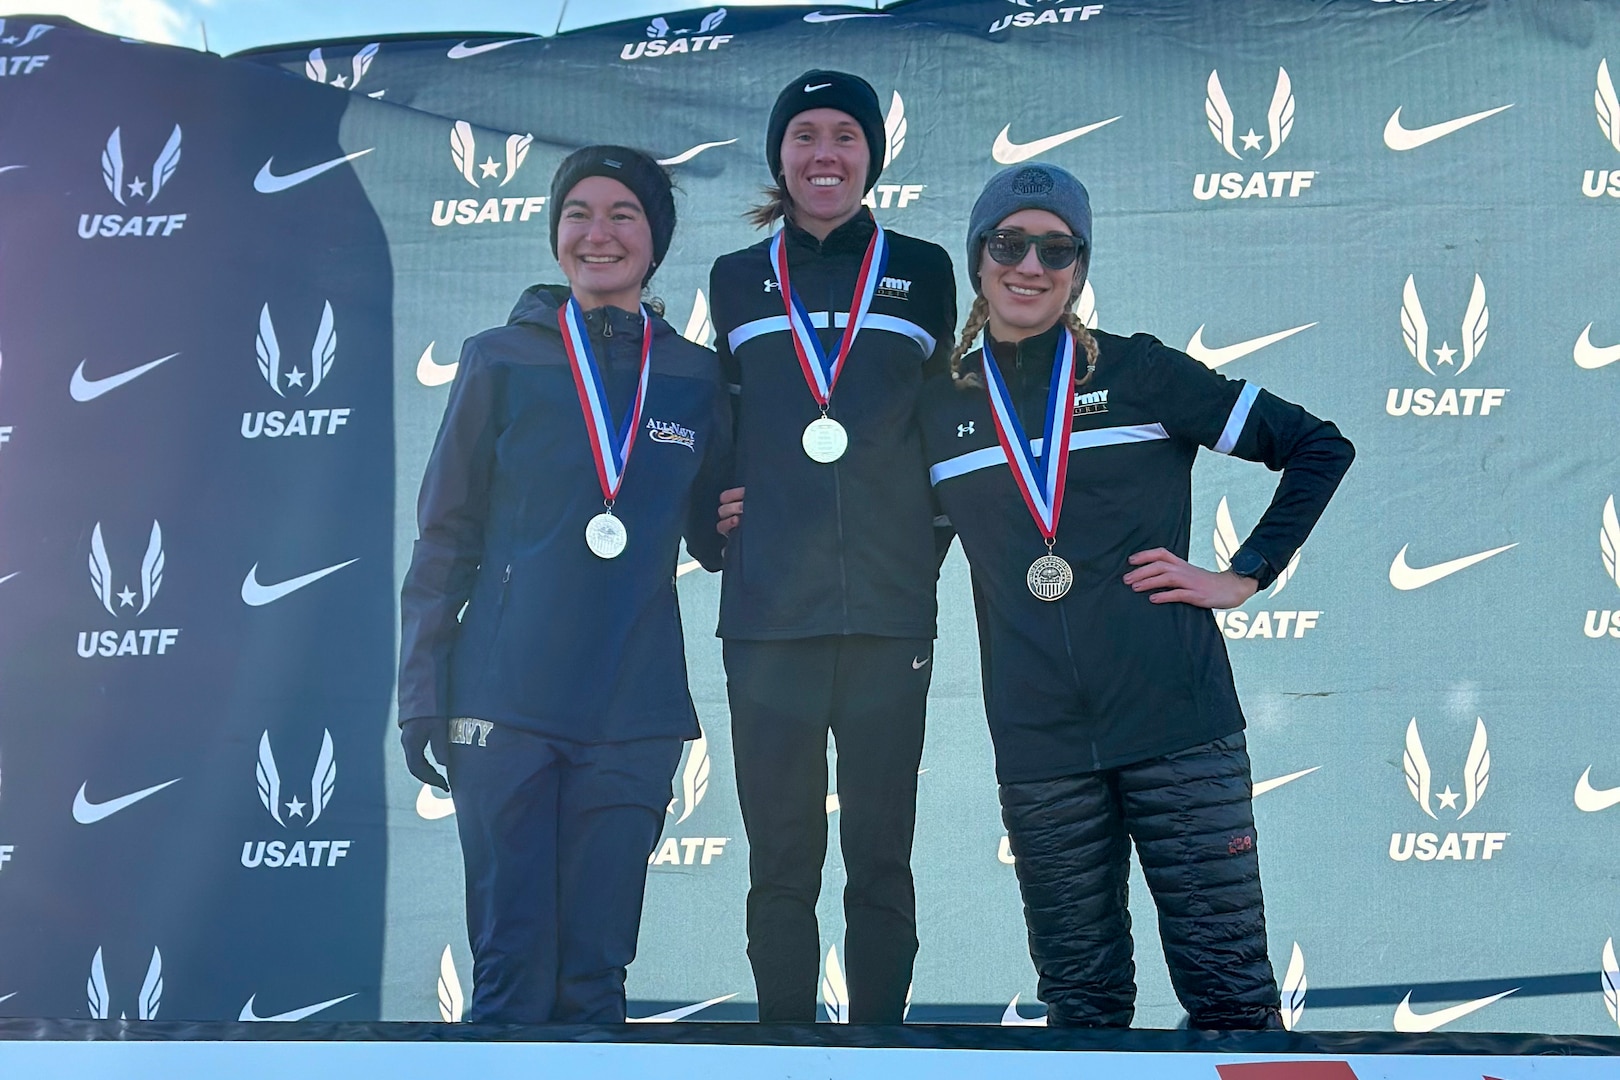 From left to right:  Navy Ensign Elizabeth Sullivan, Army Sgt. Colett Rampf, and Lt. Col. Kelly Calway willing silver, gold and bronze respectively during the 2024 Armed Forces Cross Country Championship held in conjunction with the USA Track and Field Cross Country National Championship in Richmond, Va.  The Armed Forces Championship features teams from the Army, Marine Corps, Navy (with Coast Guard runners), and Air Force (with Space Force Runners).  Department of Defense Photo by Mr. Steven Dinote - Released.